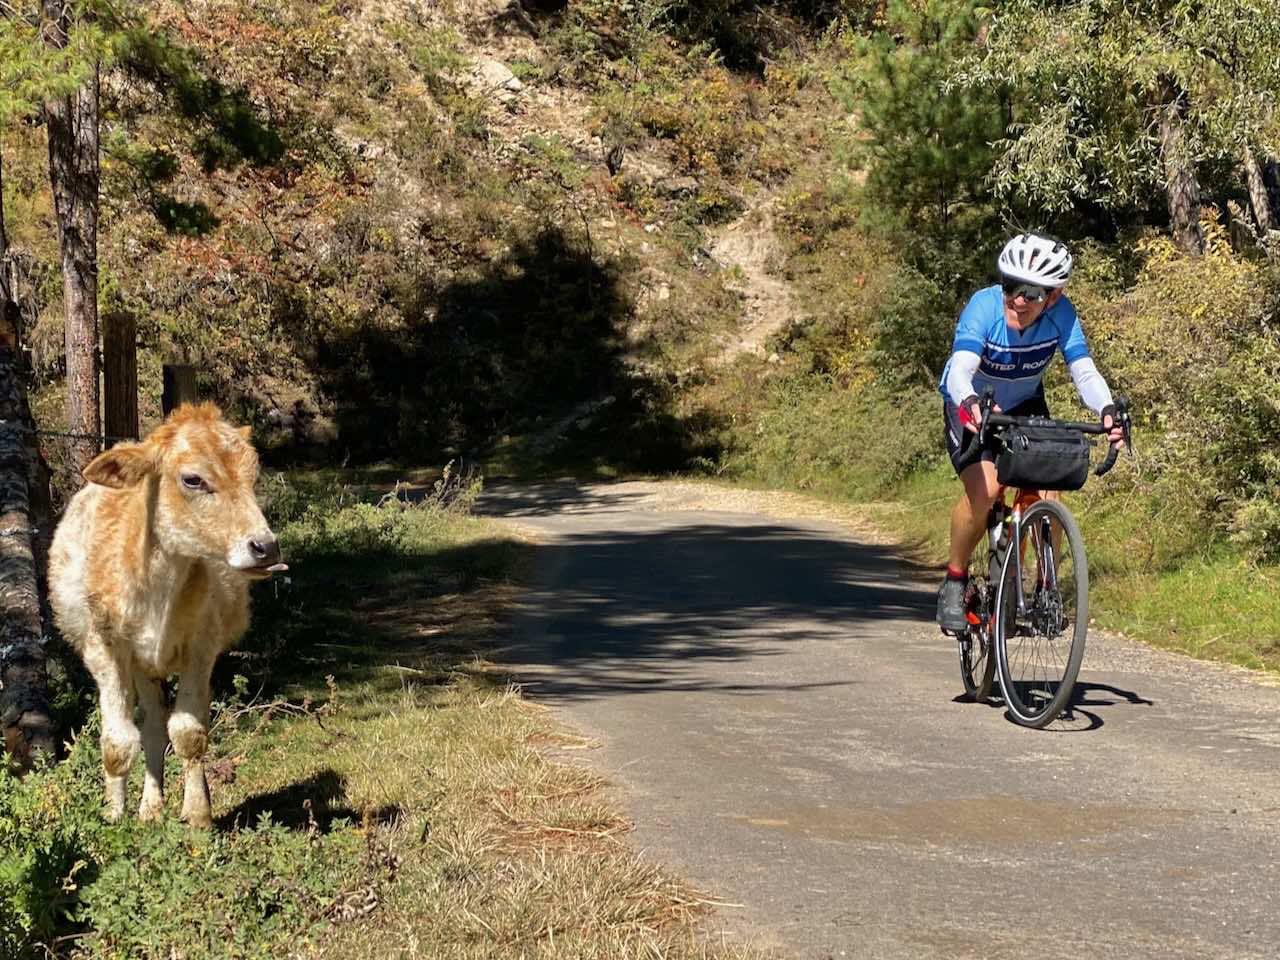 A cyclists in a blue shirt passing a cow on a quiet Bhutan road